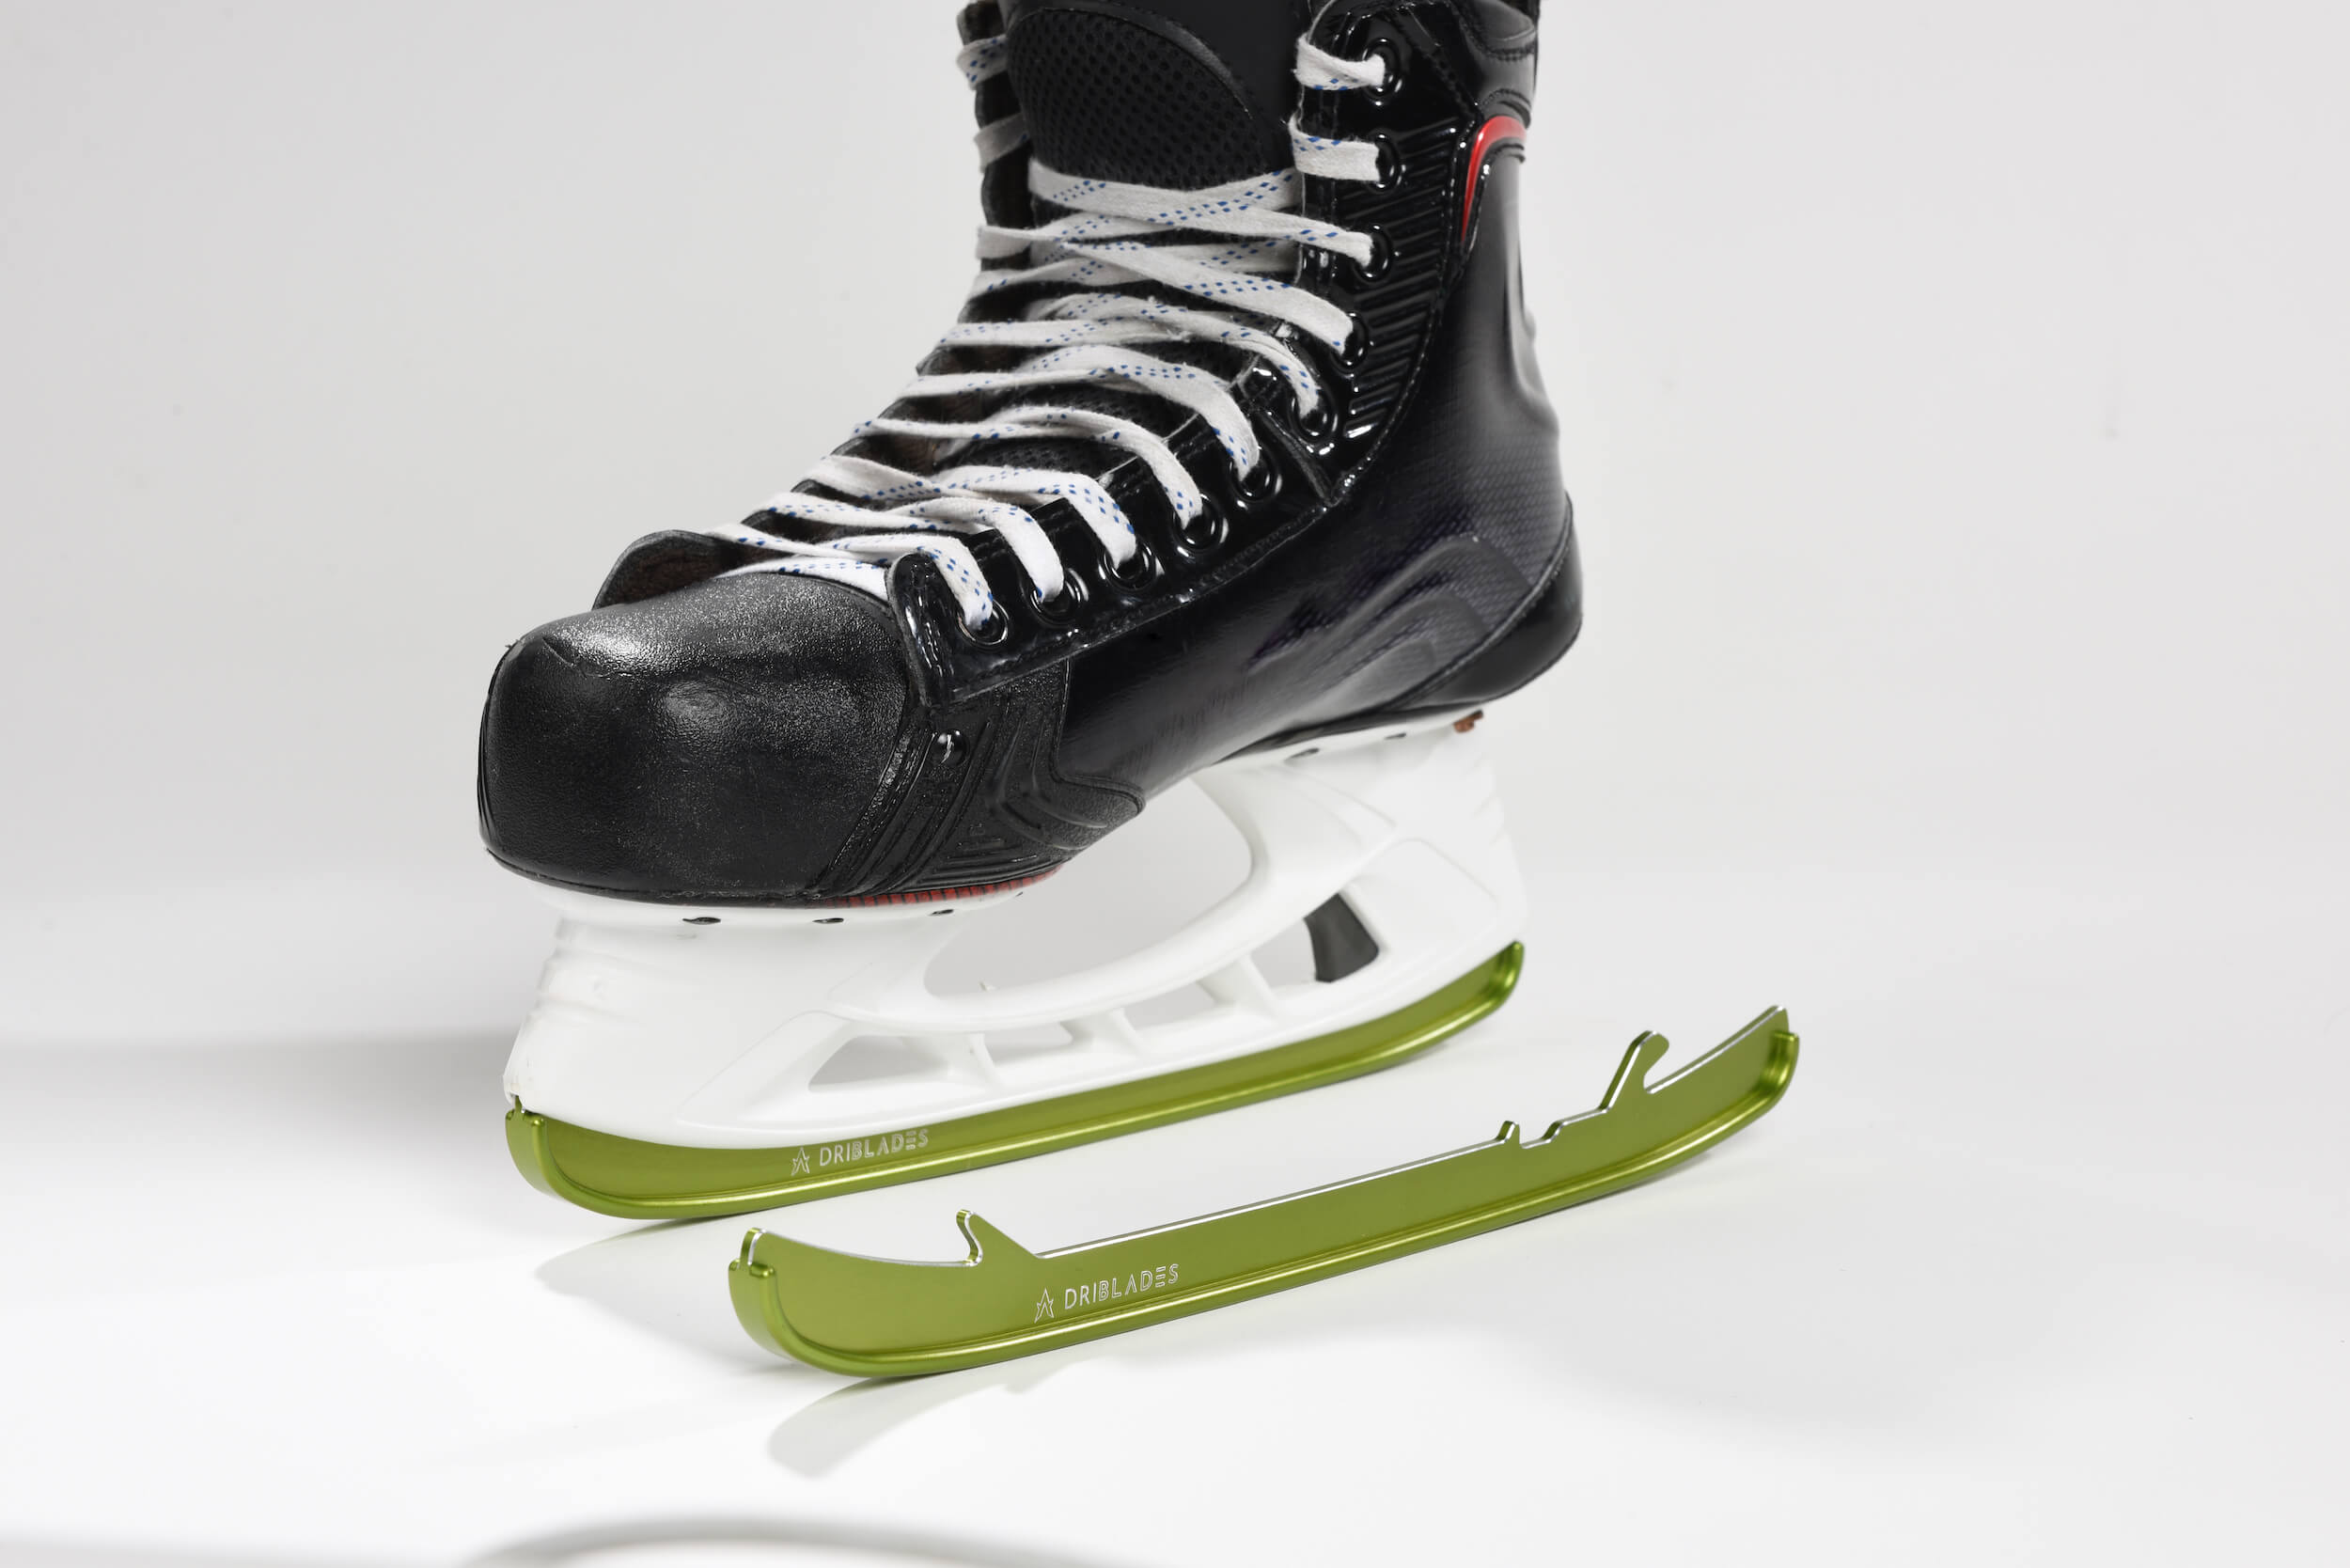 One-Skate-Two-DriBlades